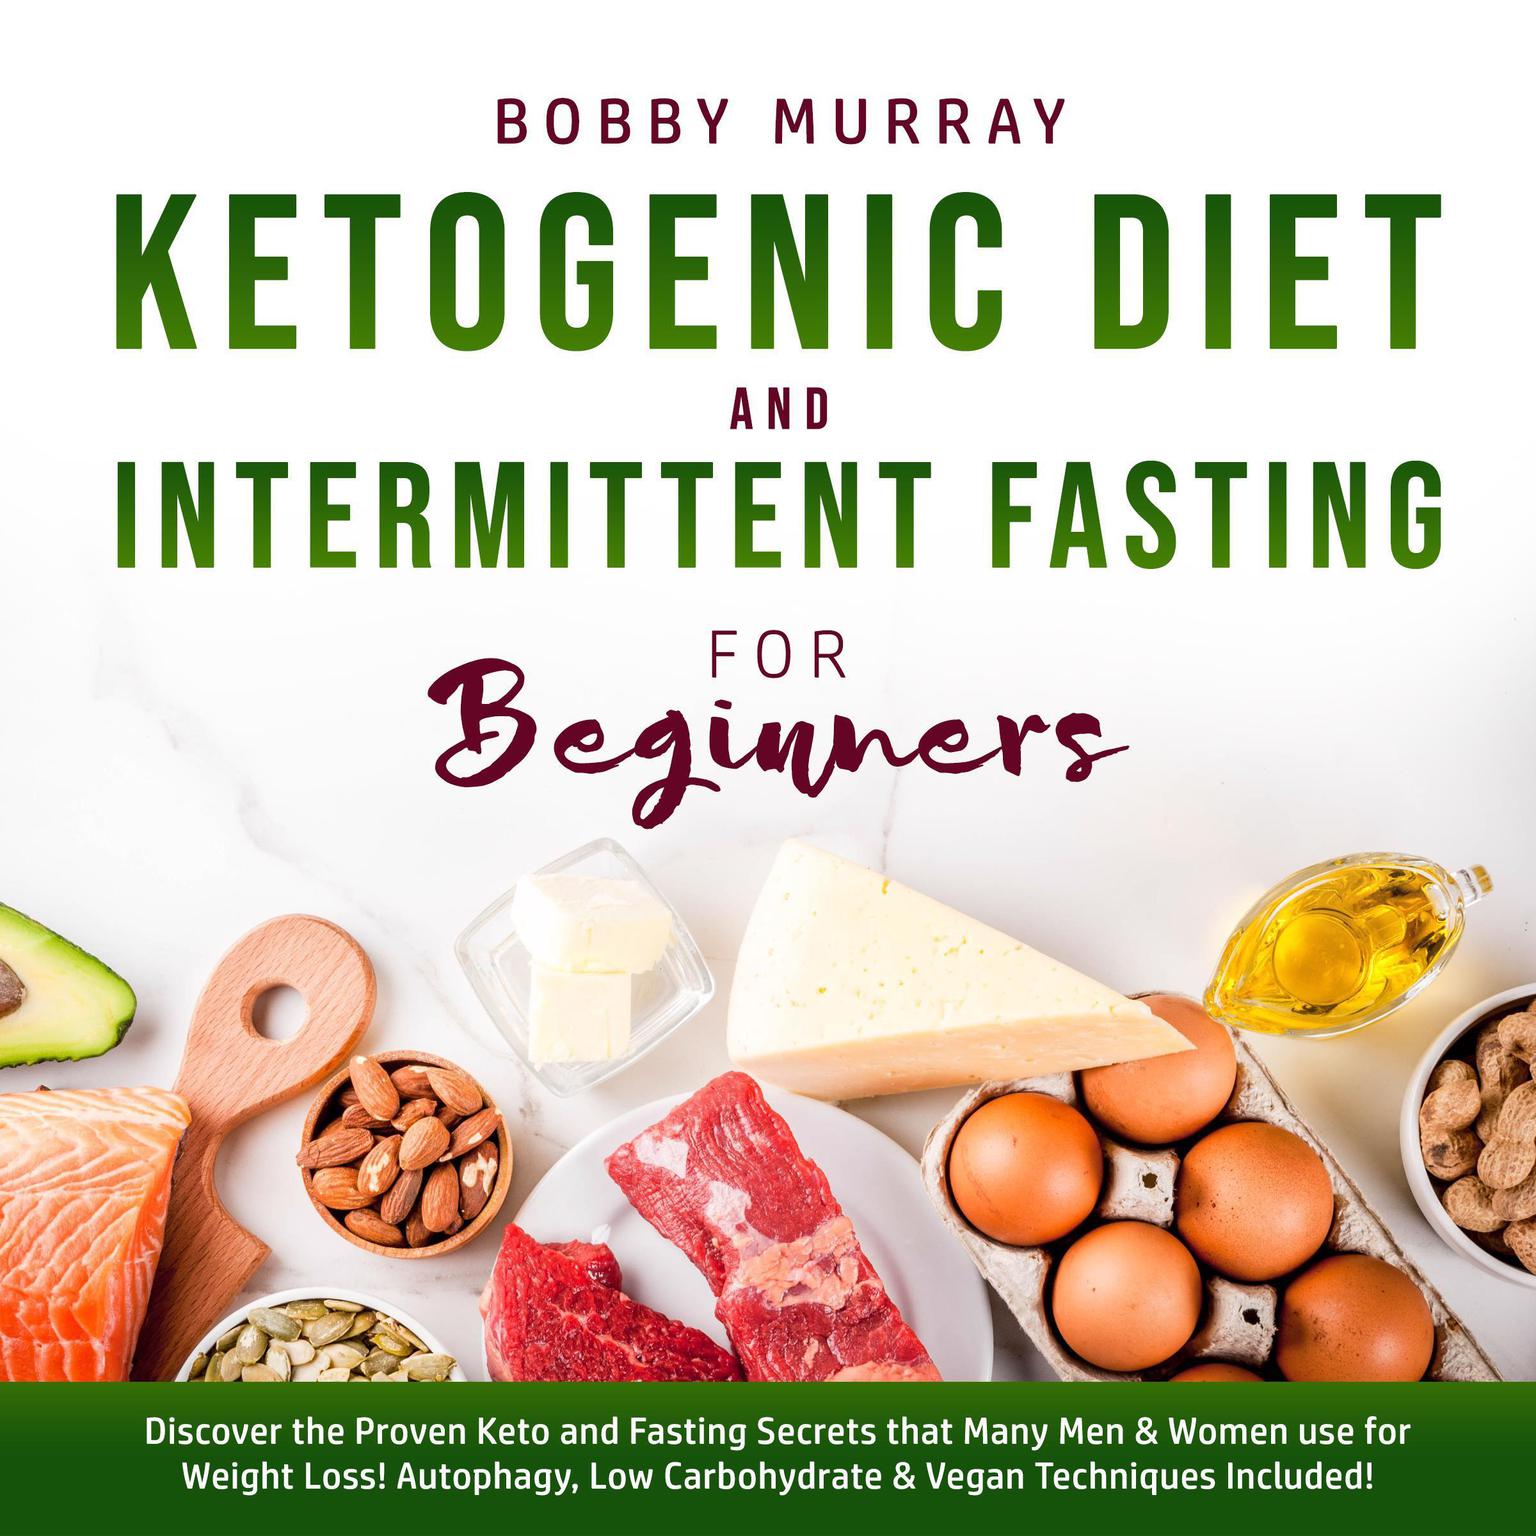 Ketogenic Diet and Intermittent Fasting for Beginners: Discover the Proven Keto and Fasting Secrets that Many Men & Women use for Weight Loss! Autophagy, Low Carbohydrate & Vegan Techniques Included! Audiobook, by Bobby Murray